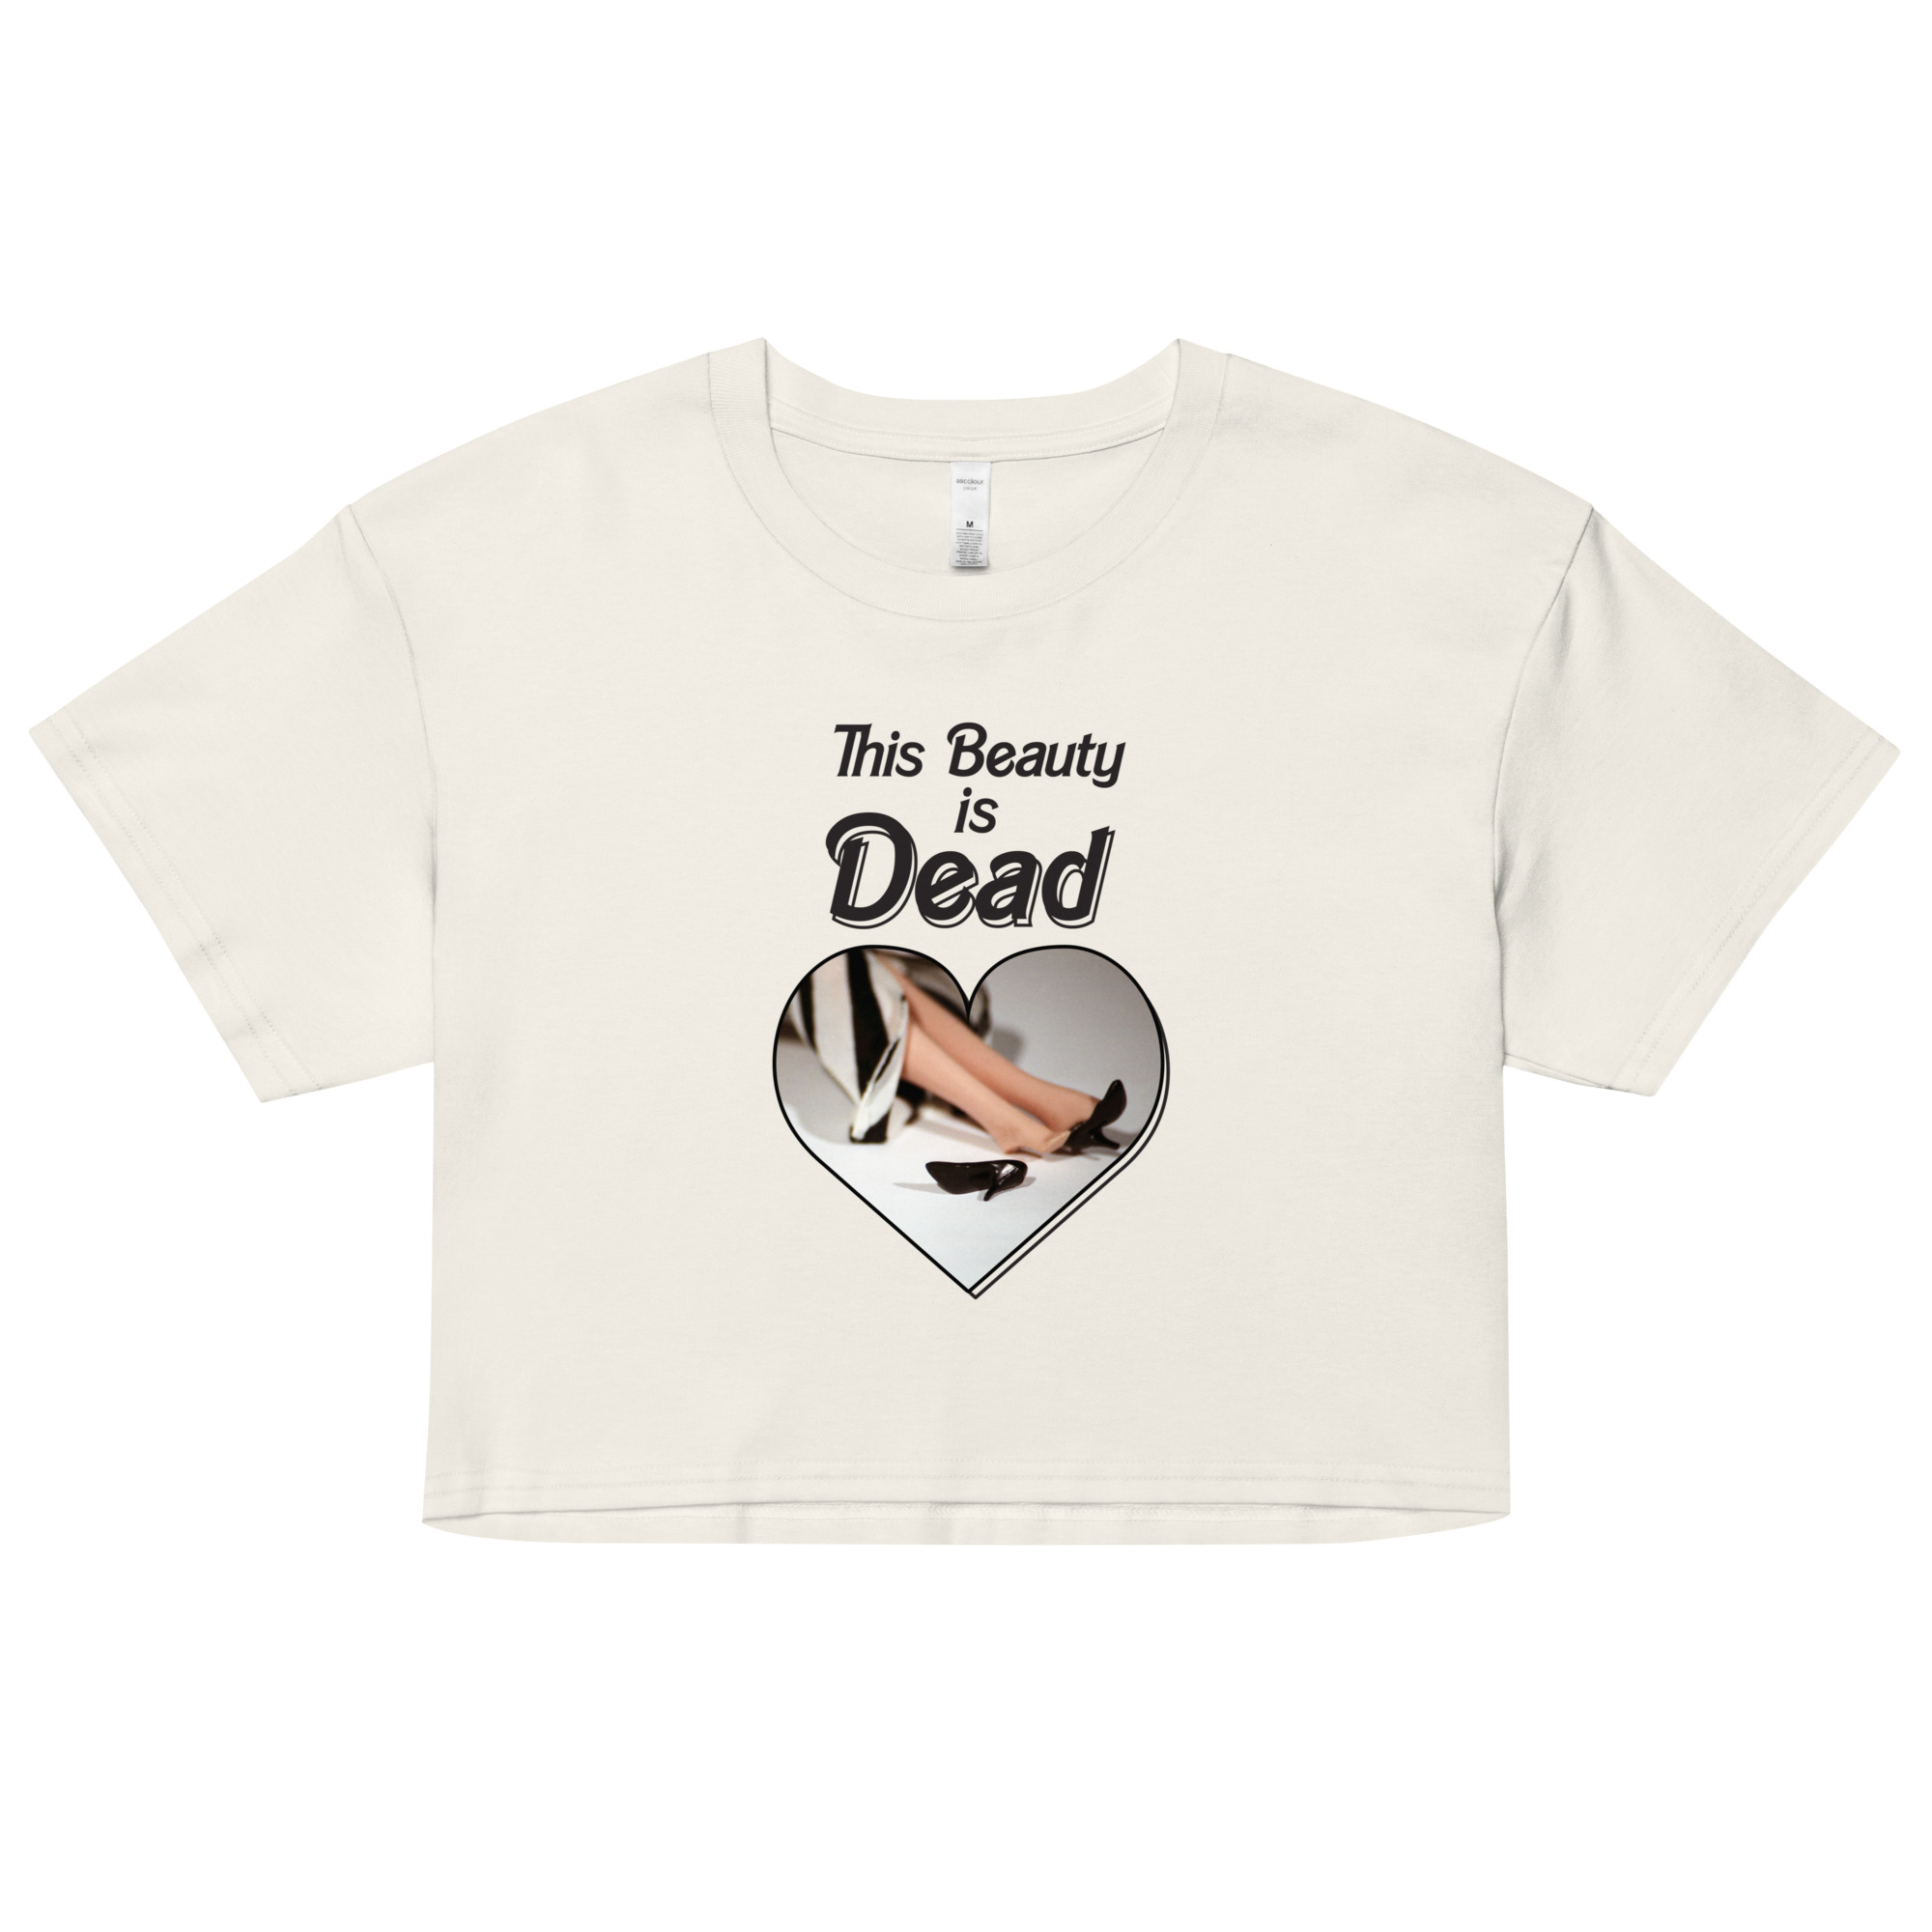 This Beauty is Dead crop top by Wilde Designs